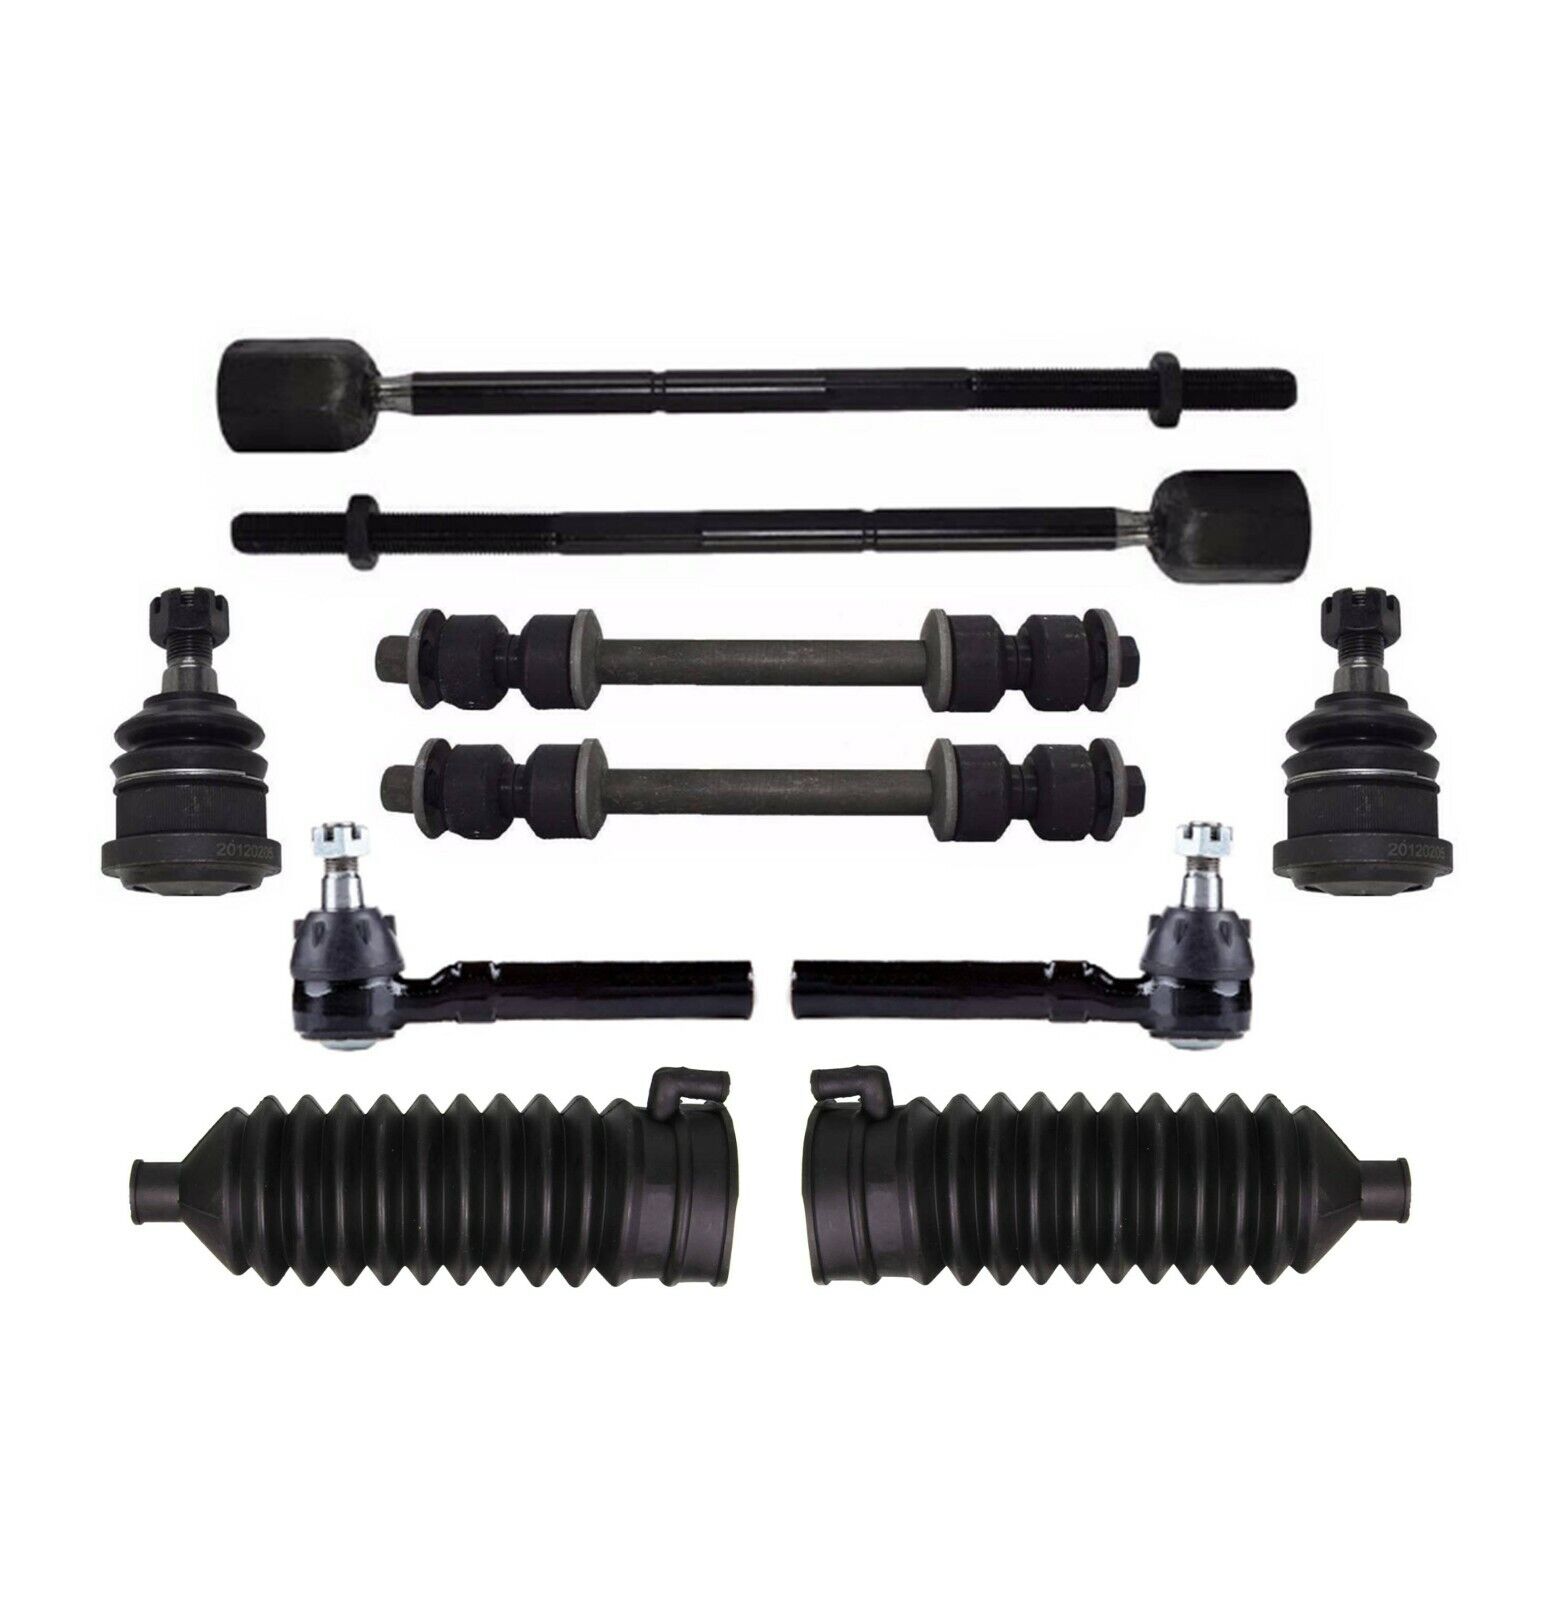 New 10Pc Complete Front Suspension Kit for Ford Mustang 1994-2004